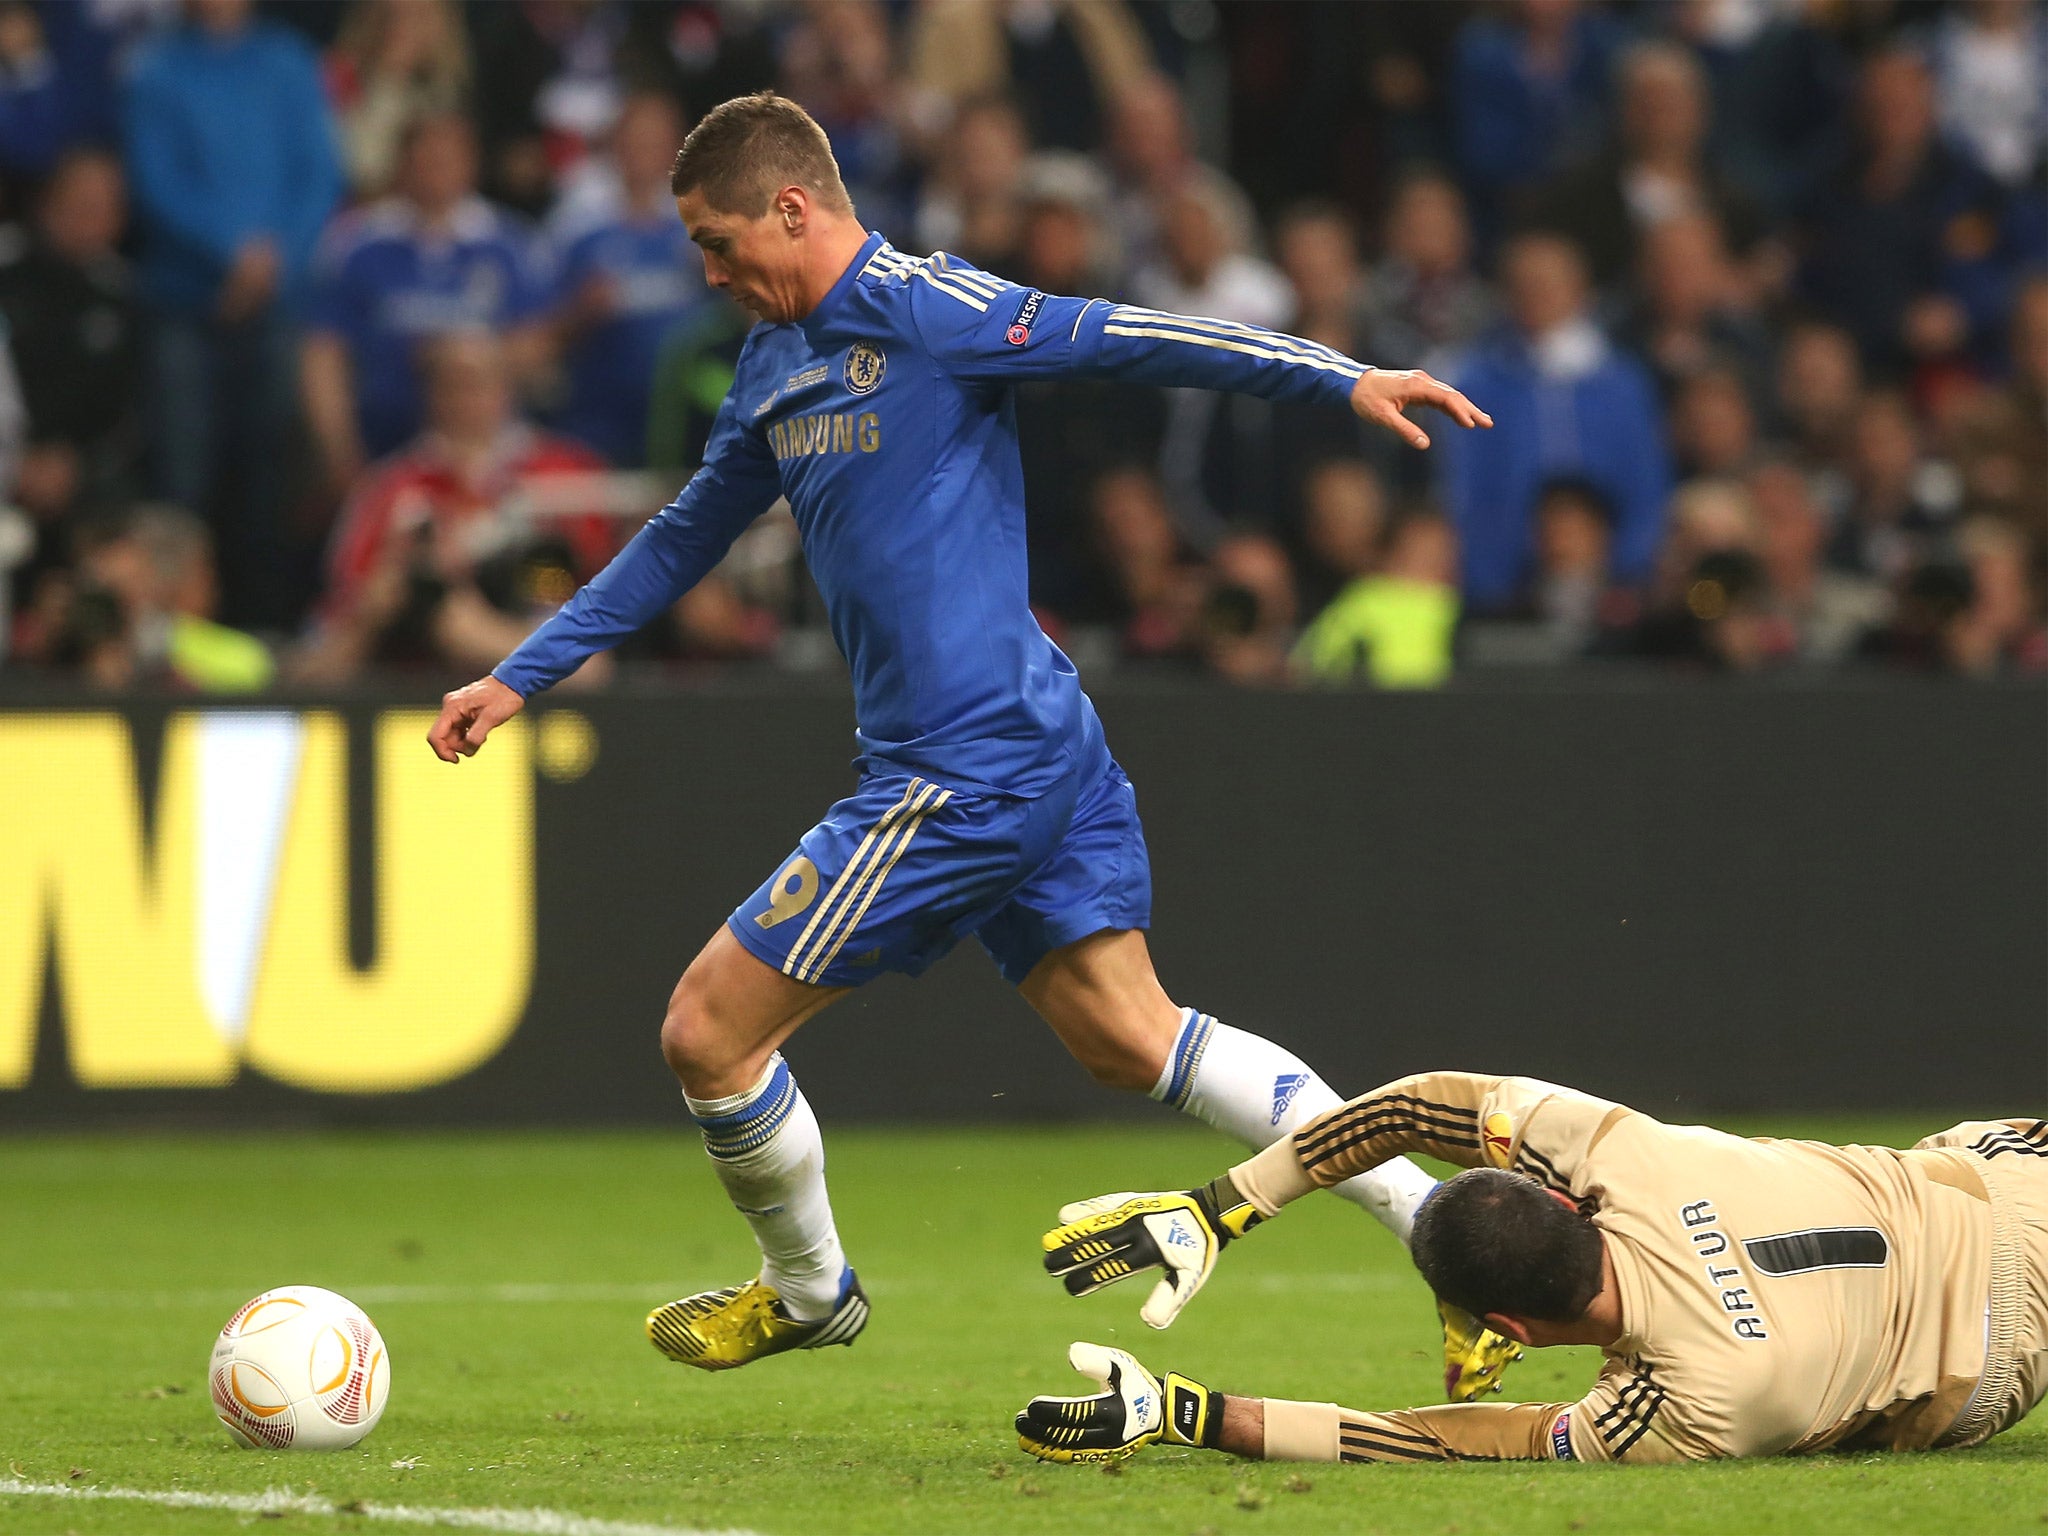 Fernando Torres beats Artur before slotting the ball into the empty net to make it 1-0